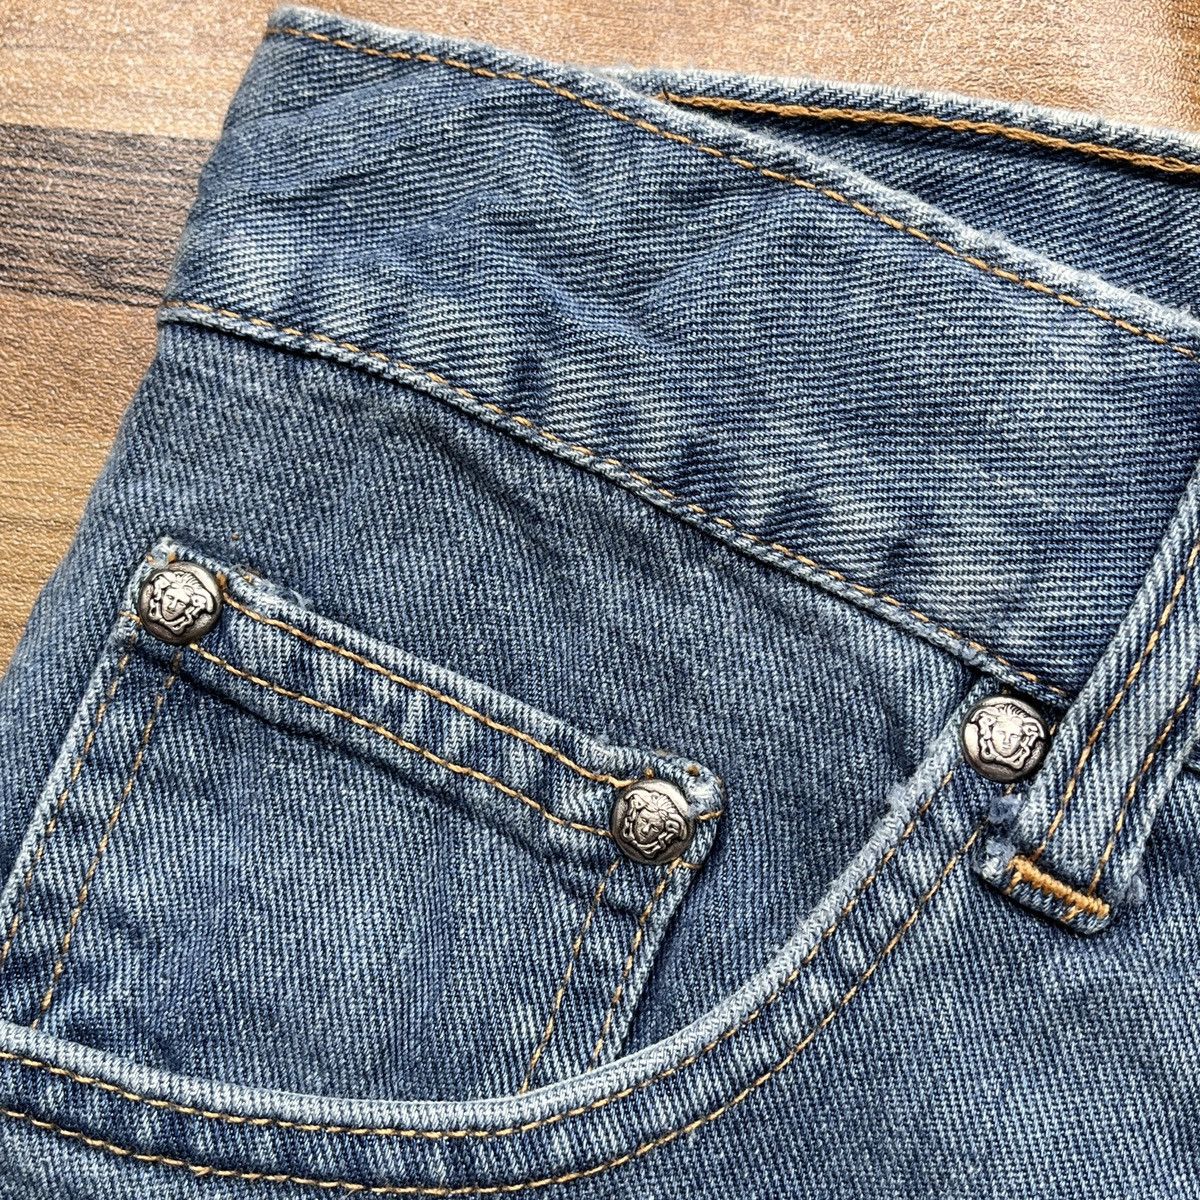 Vintage Versace Denim Jeans Made In Italy - 8